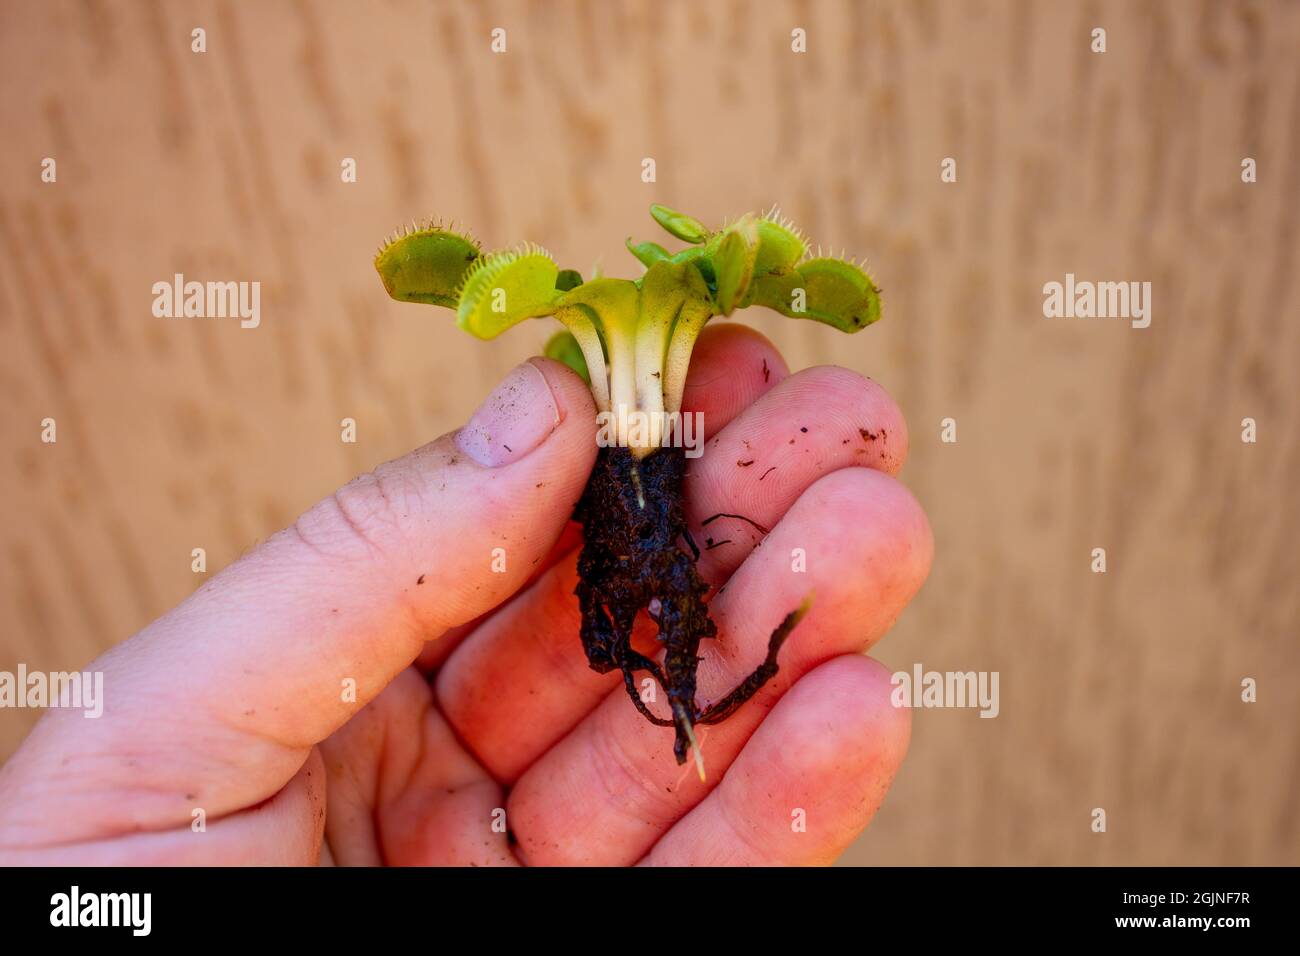 Leaves, white rhizome and roots covered in soil of the Venus flytrap plant in a caucasian man's hand. Stock Photo